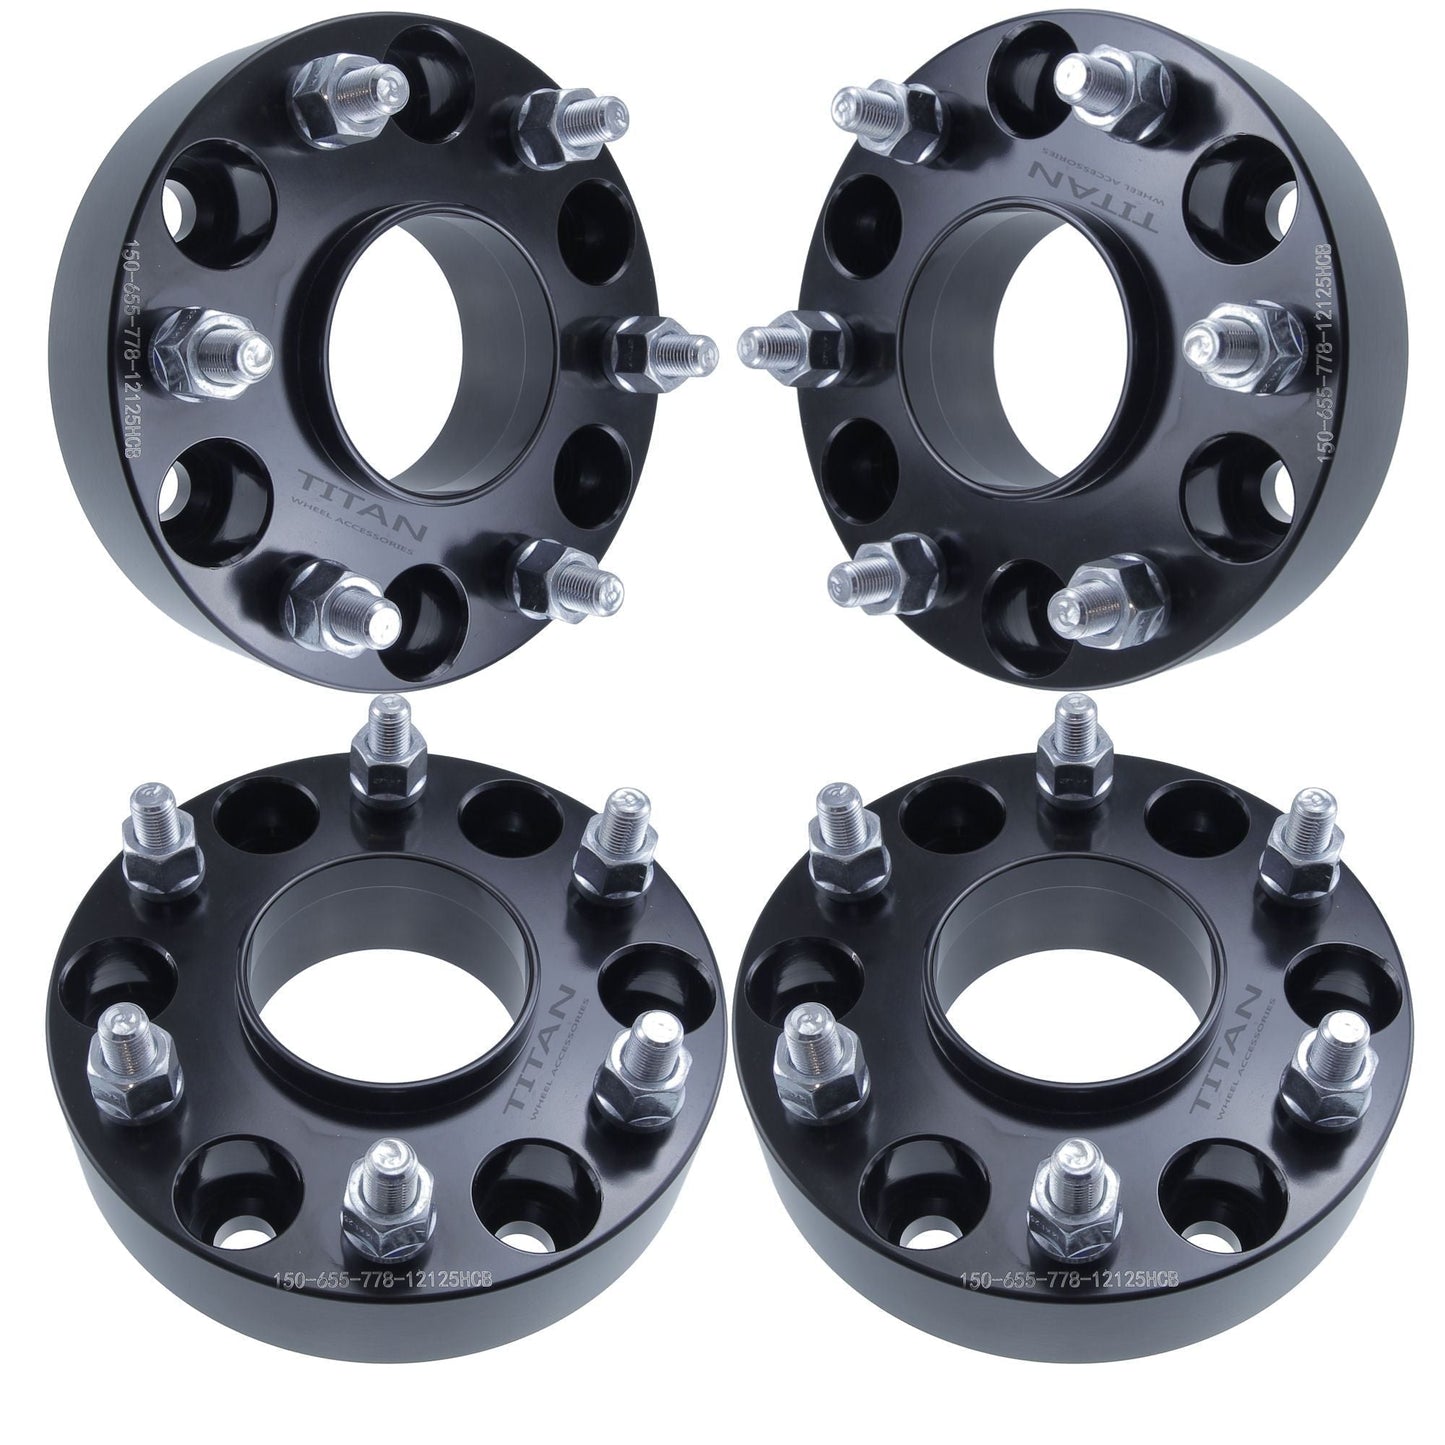 2" (50mm) Titan Wheel Spacers for Chevy Silverado Tahoe Avalanche Suburban | 6x5.5 (6x139.7) | 78.1 Hubcentric |14x1.5 Studs |  Set of 4 | Titan Wheel Accessories